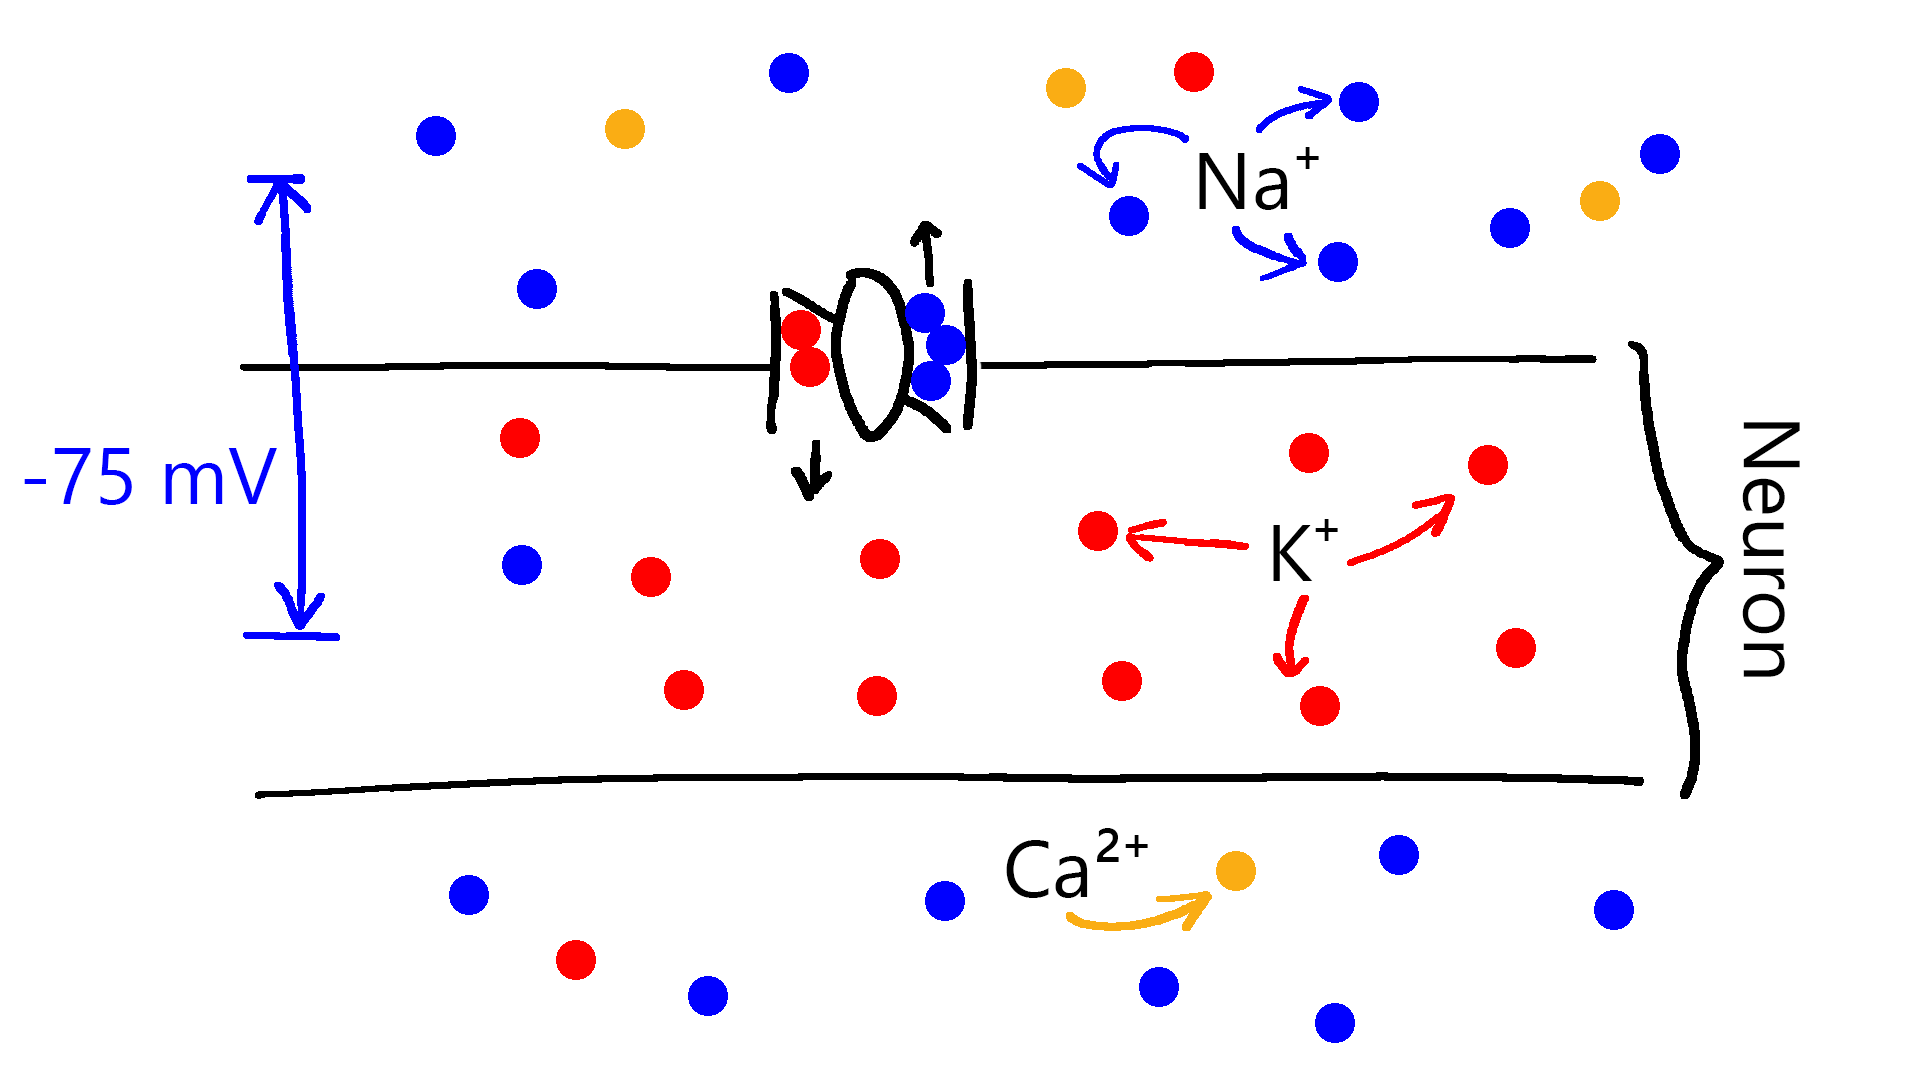 A crude depiction of a Na⁺-K⁺ pump, one of the mechanisms maintaining the ion balance in the neuron. Na⁺-K⁺ pump removes three Na⁺ ions for two K⁺ ions.